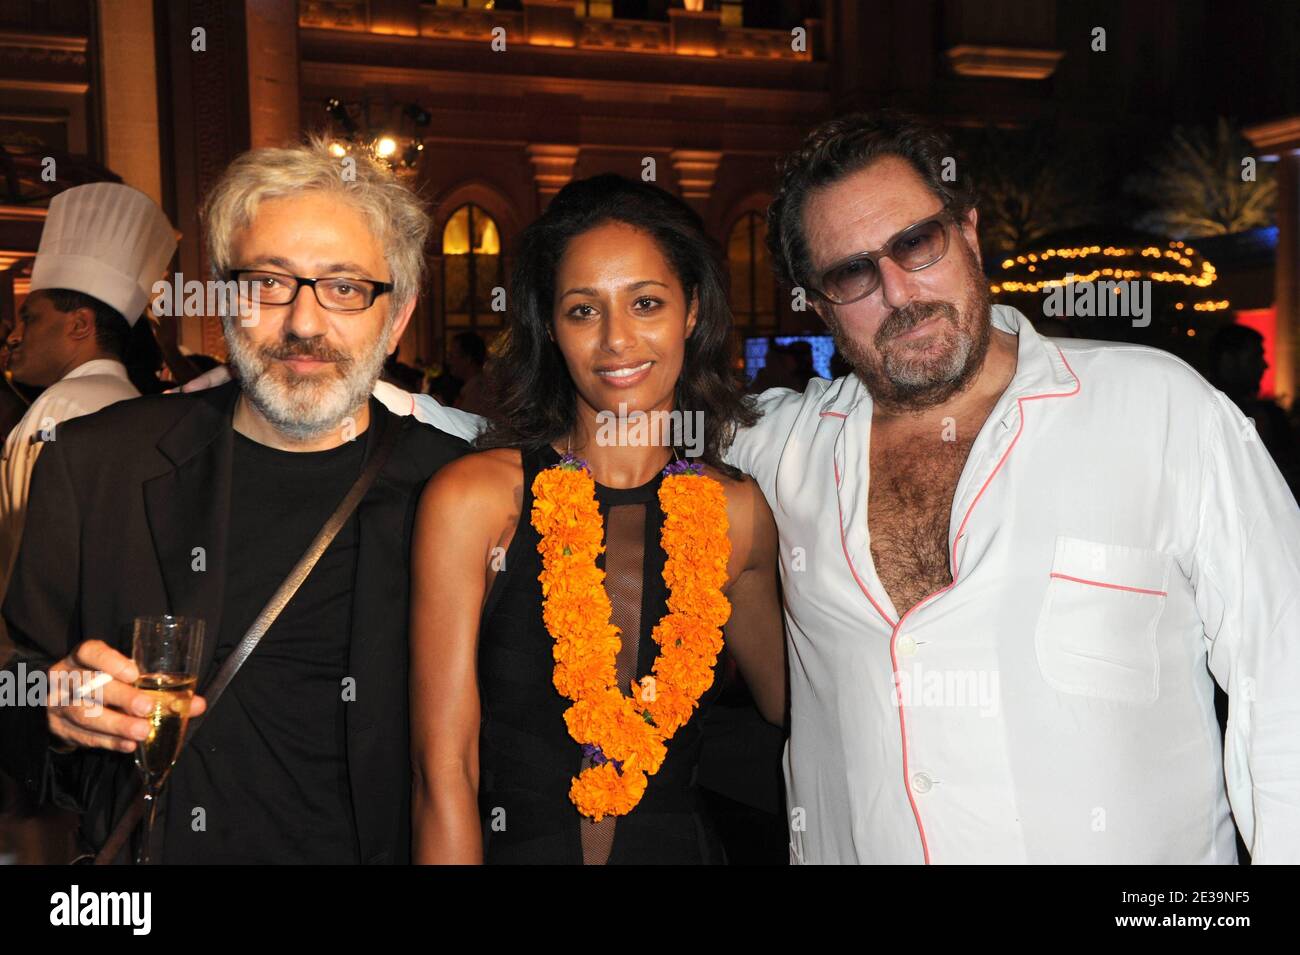 Palestinian director Elia Suleiman (L), journalist-writer Rula Jebreal (C)  and U.S. director Julian Schnabel in his famous pyjamas (R) seen at a party  at the Abu Dhabi Interntional Film Festival in Abu